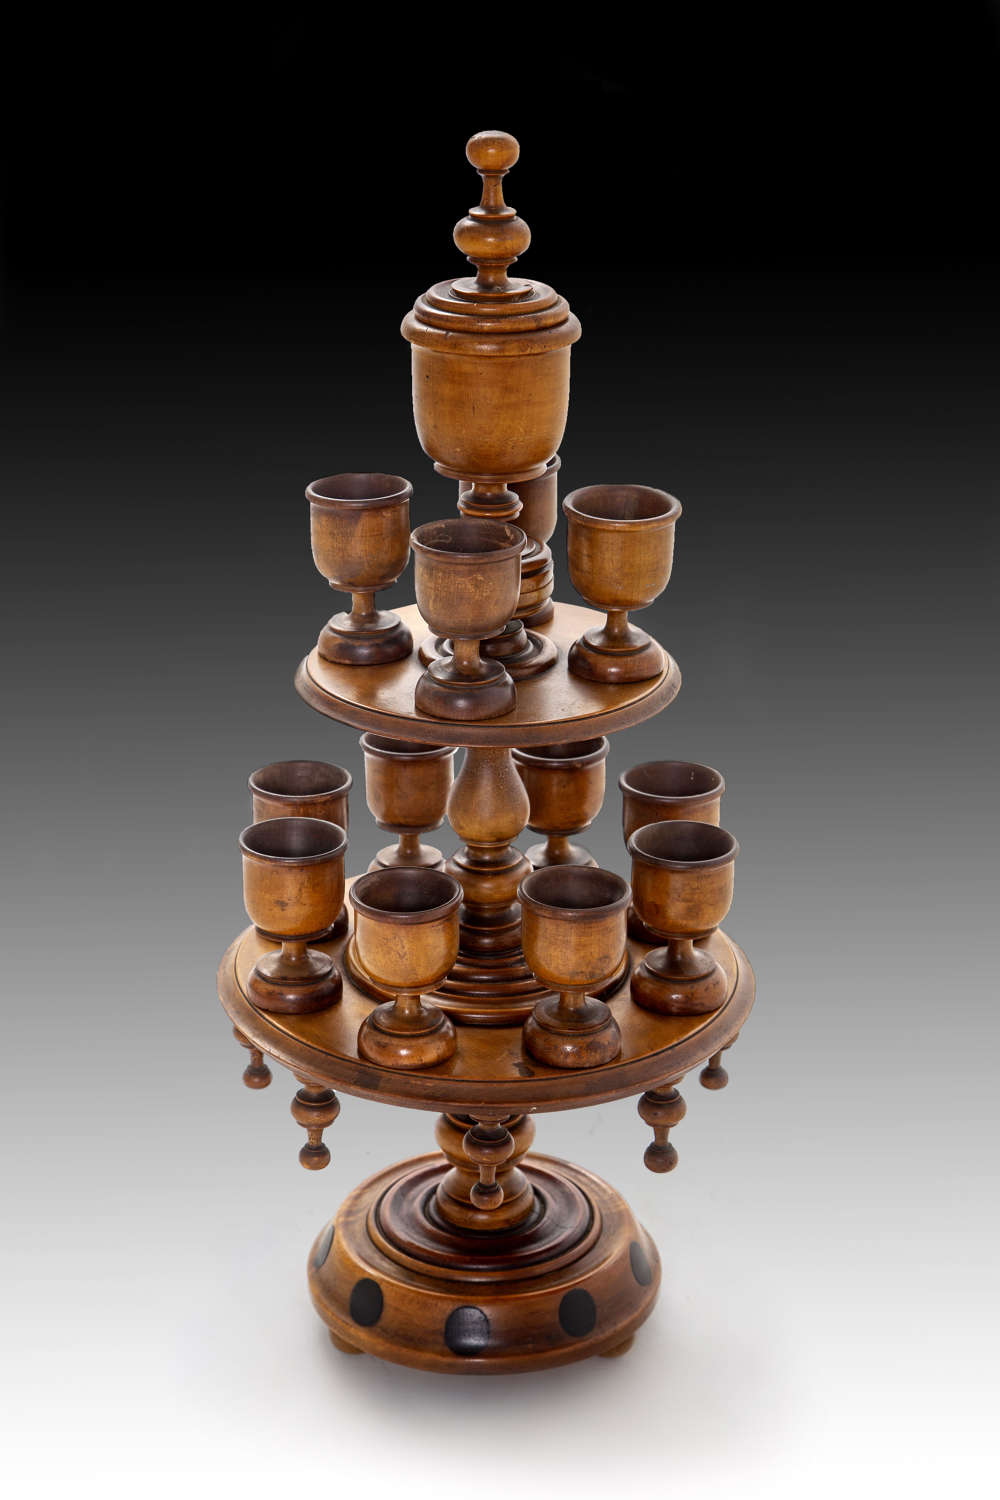 A 19th century satinwood egg stand